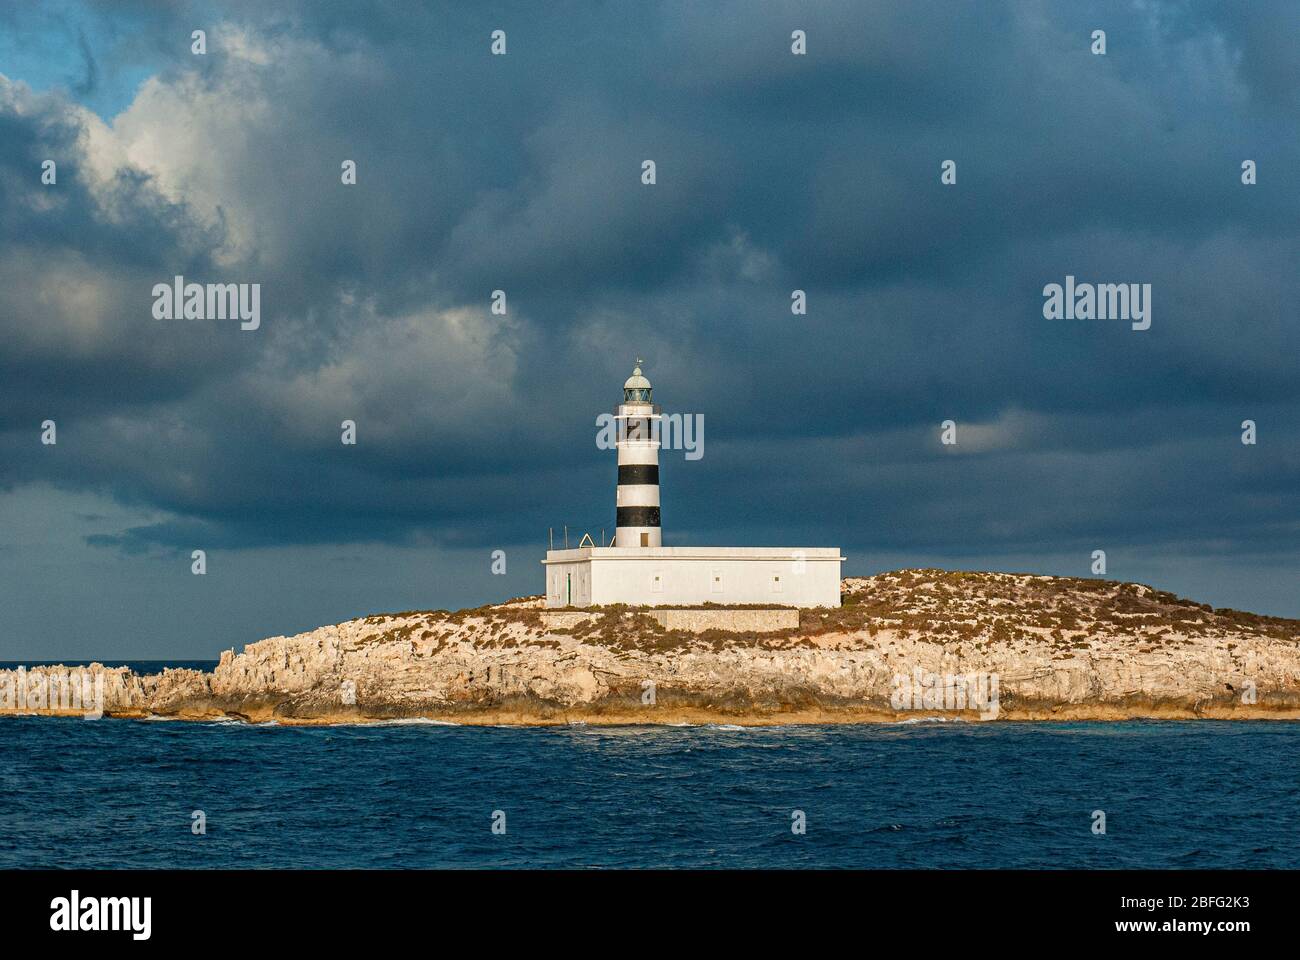 Faro des Penjats, Ibiza, Balearic Islands, Spain. It is located on the Isla de Penjats, very close to the port of Ibiza. Built in 1856. Stock Photo